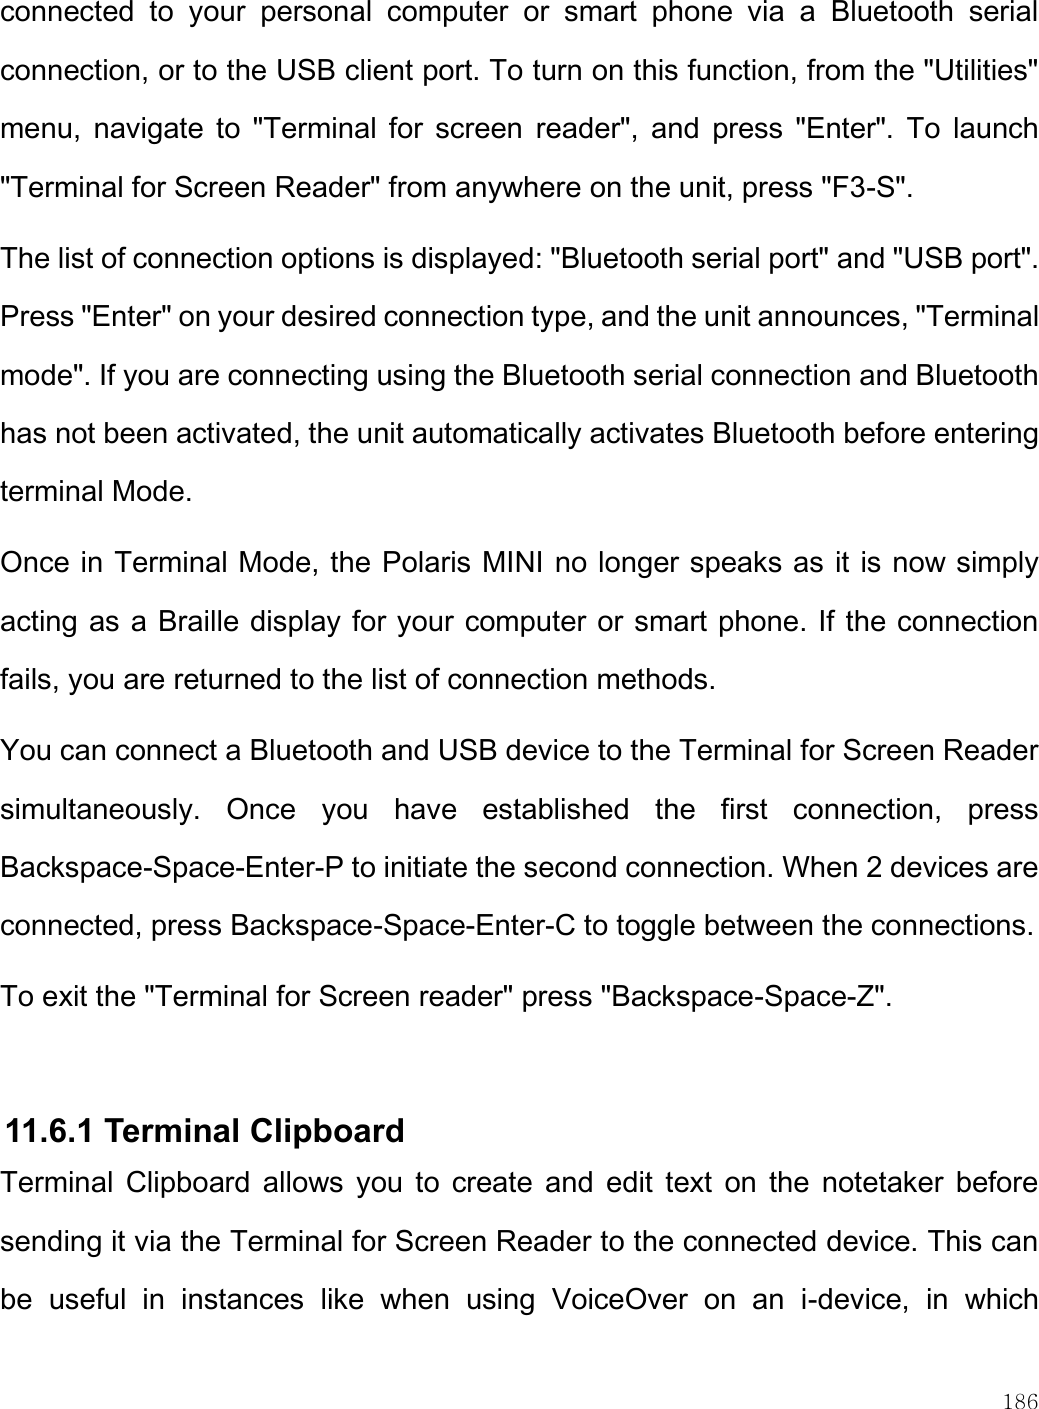    186  connected  to  your  personal  computer  or  smart  phone  via  a  Bluetooth  serial connection, or to the USB client port. To turn on this function, from the &quot;Utilities&quot; menu,  navigate  to  &quot;Terminal for  screen  reader&quot;,  and  press  &quot;Enter&quot;.  To  launch &quot;Terminal for Screen Reader&quot; from anywhere on the unit, press &quot;F3-S&quot;.  The list of connection options is displayed: &quot;Bluetooth serial port&quot; and &quot;USB port&quot;. Press &quot;Enter&quot; on your desired connection type, and the unit announces, &quot;Terminal mode&quot;. If you are connecting using the Bluetooth serial connection and Bluetooth has not been activated, the unit automatically activates Bluetooth before entering terminal Mode. Once in Terminal Mode, the Polaris MINI no longer speaks as it is now simply acting as a Braille display for your computer or smart phone. If the connection fails, you are returned to the list of connection methods. You can connect a Bluetooth and USB device to the Terminal for Screen Reader simultaneously.  Once  you  have  established  the  first  connection,  press Backspace-Space-Enter-P to initiate the second connection. When 2 devices are connected, press Backspace-Space-Enter-C to toggle between the connections. To exit the &quot;Terminal for Screen reader&quot; press &quot;Backspace-Space-Z&quot;.   11.6.1 Terminal Clipboard Terminal  Clipboard allows  you  to  create  and edit text  on  the  notetaker before sending it via the Terminal for Screen Reader to the connected device. This can be  useful  in  instances  like  when  using  VoiceOver  on  an  i-device,  in  which 